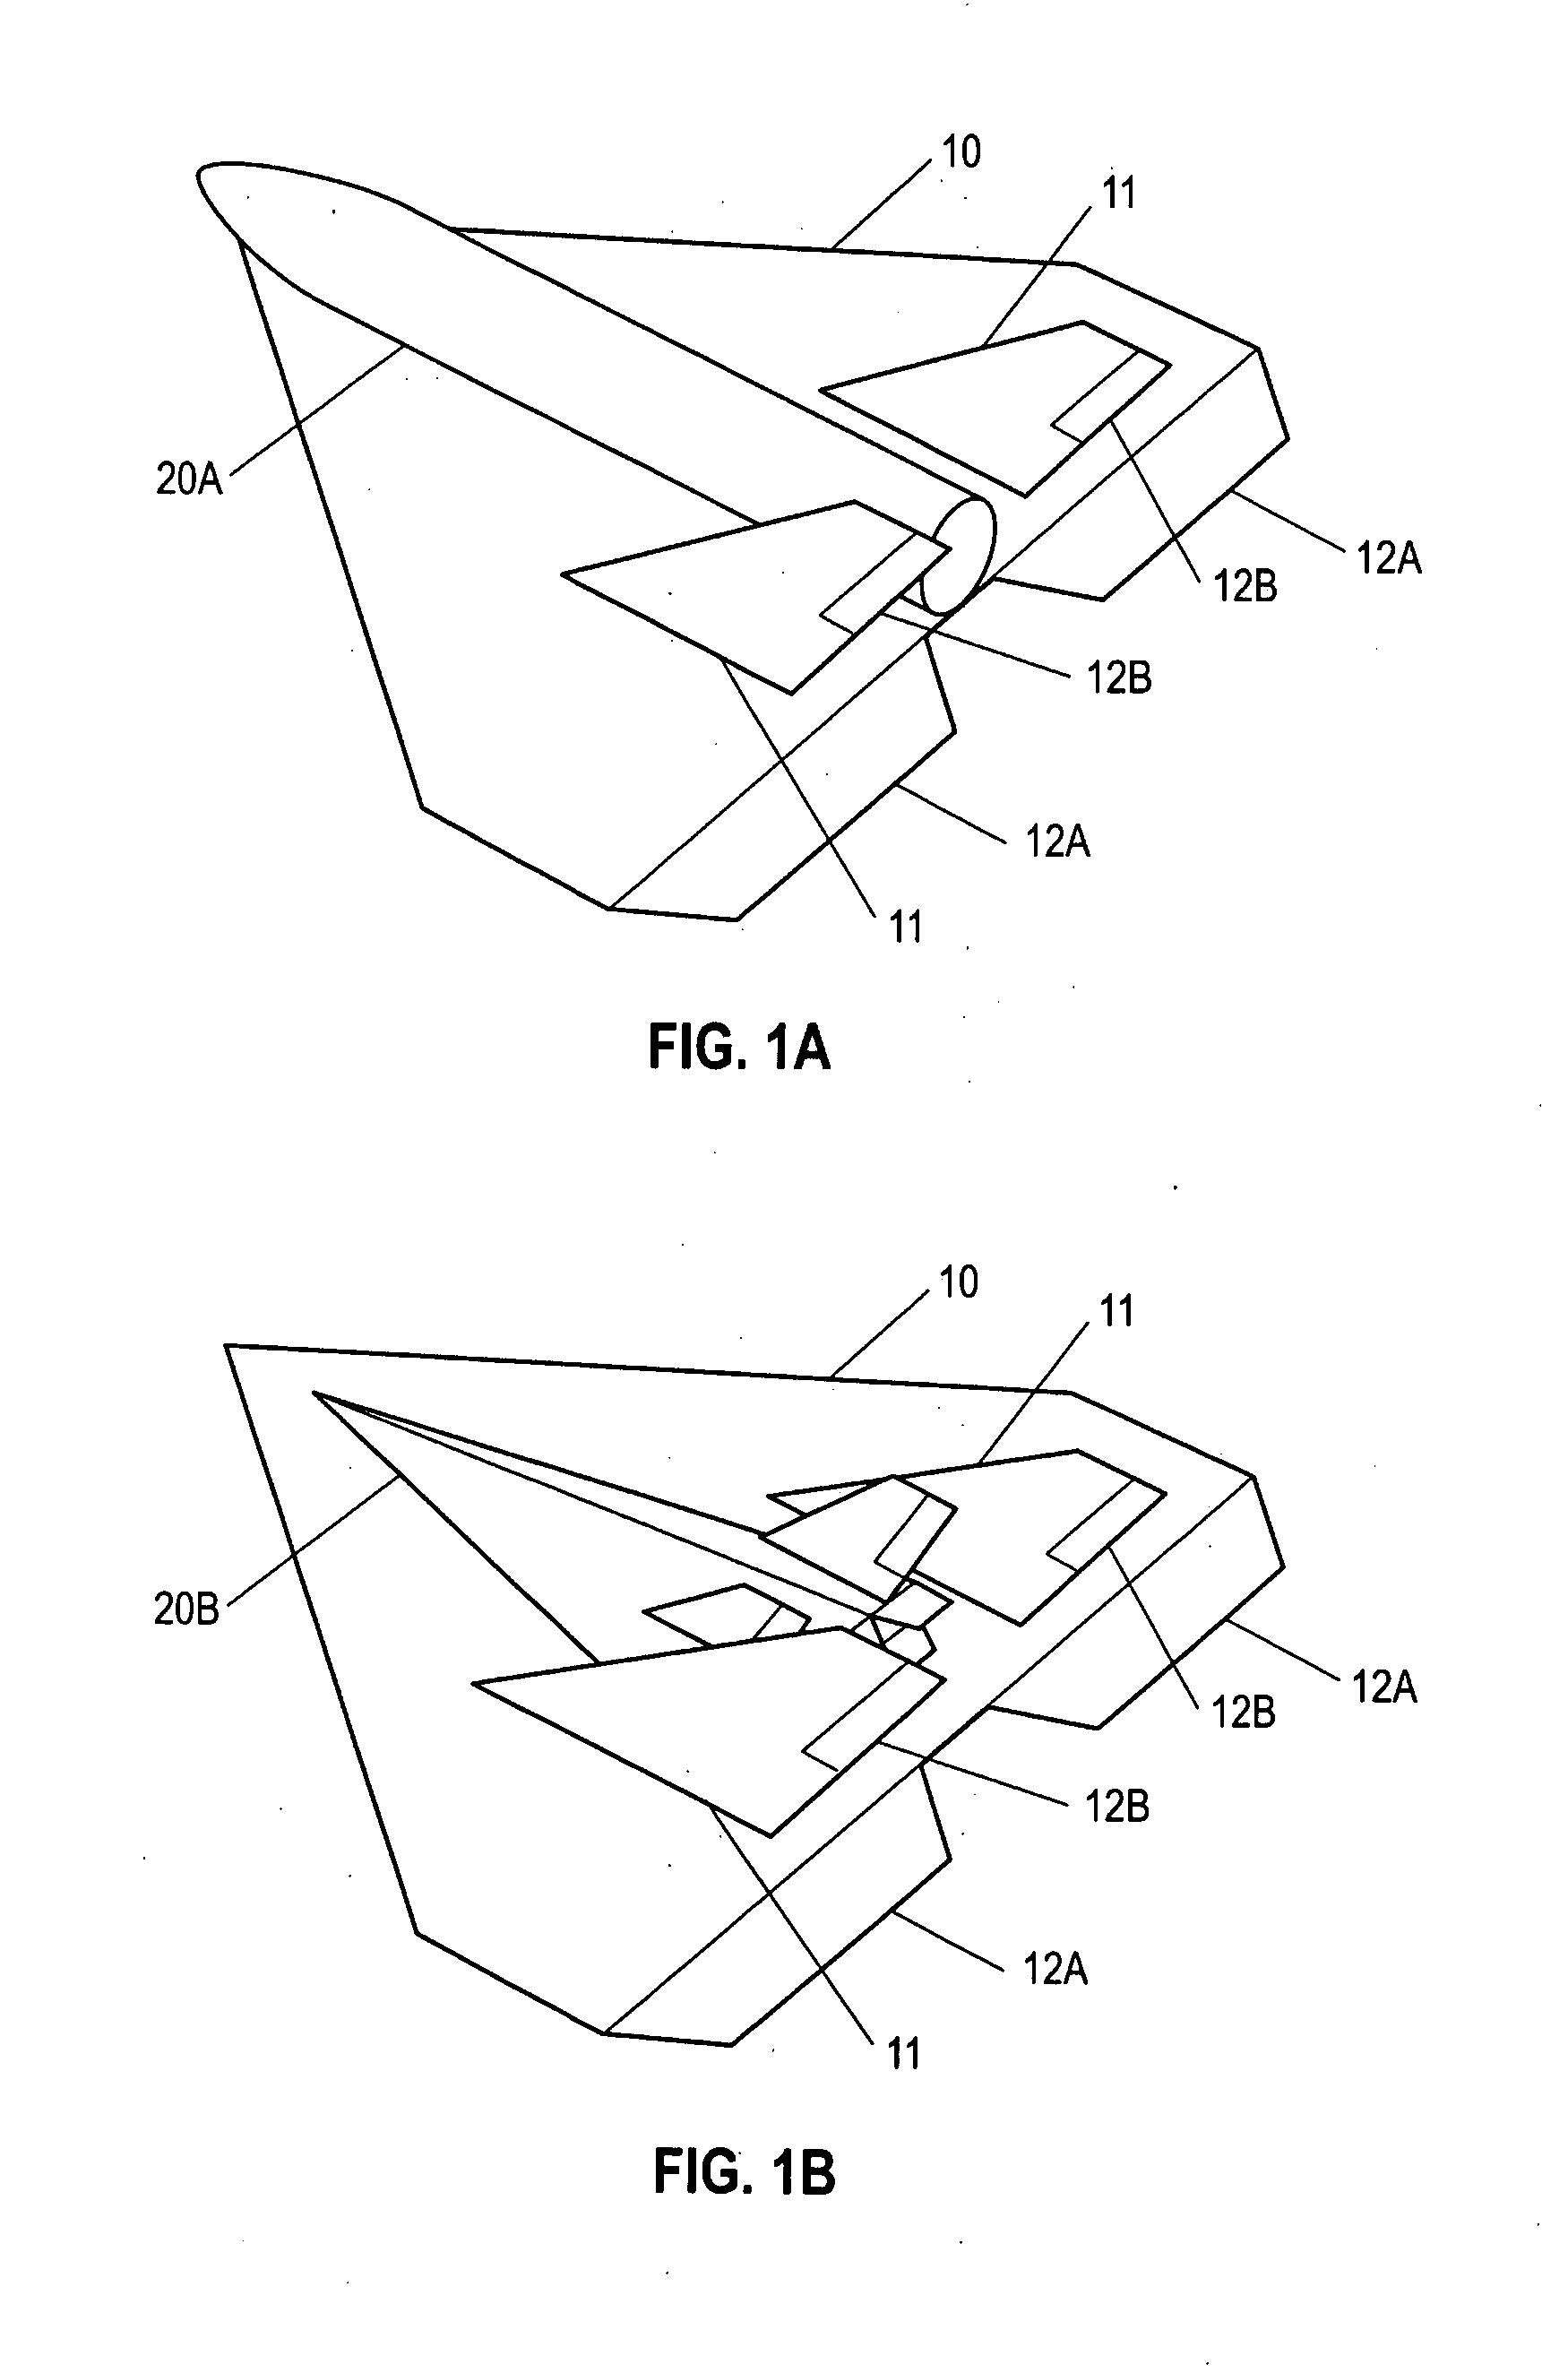 Non-powered, aero-assisted pre-stage for ballistic rockets and aero-assisted flight vehicles